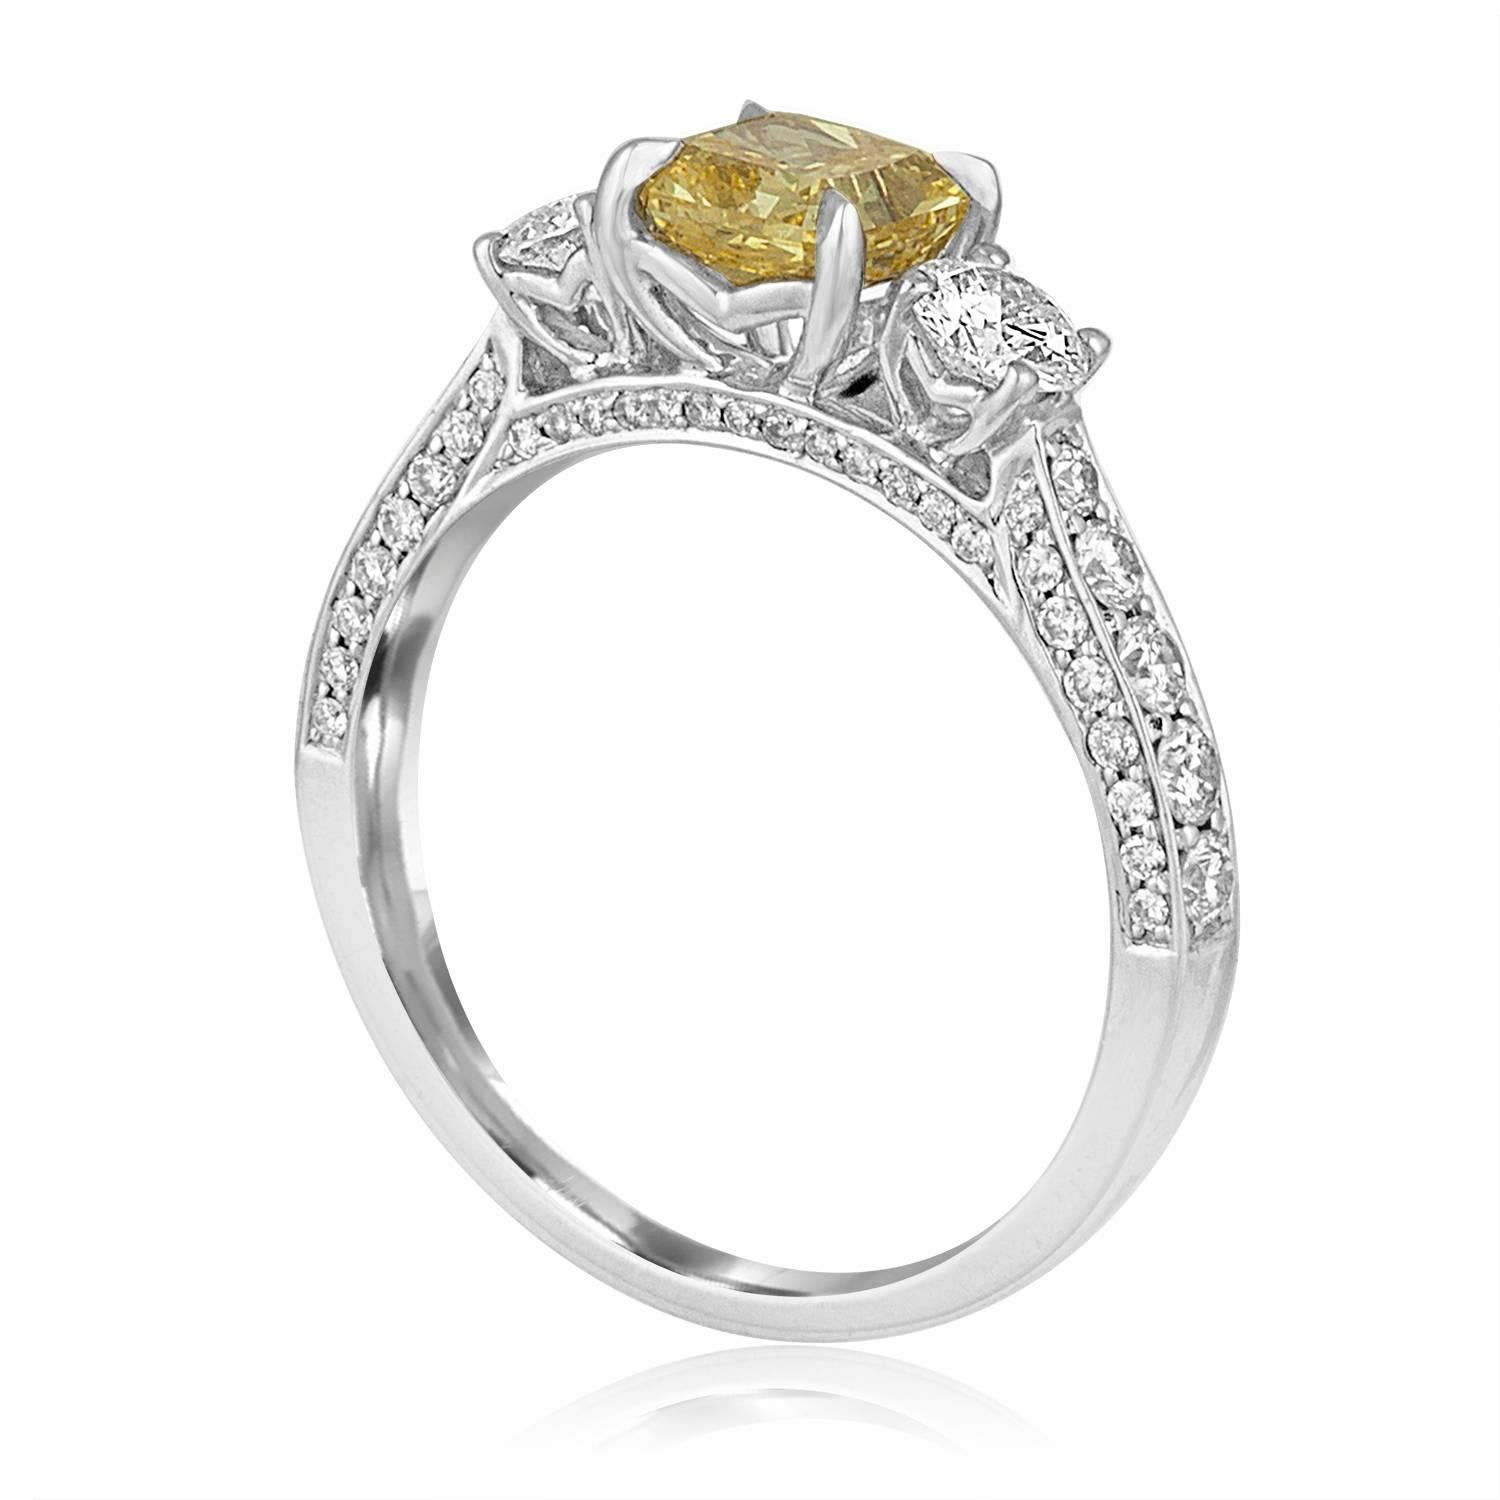 Stunning 3 Stone Engagement Ring
The ring is 14K White Gold
The center stone is GIA Certified Diamond
The stone is Radiant Cut Fancy Intense Yellow 0.91 Carat VS2
The side stones are 0.34 Carats F SI
There are small stones on the band 0.43 Carats F